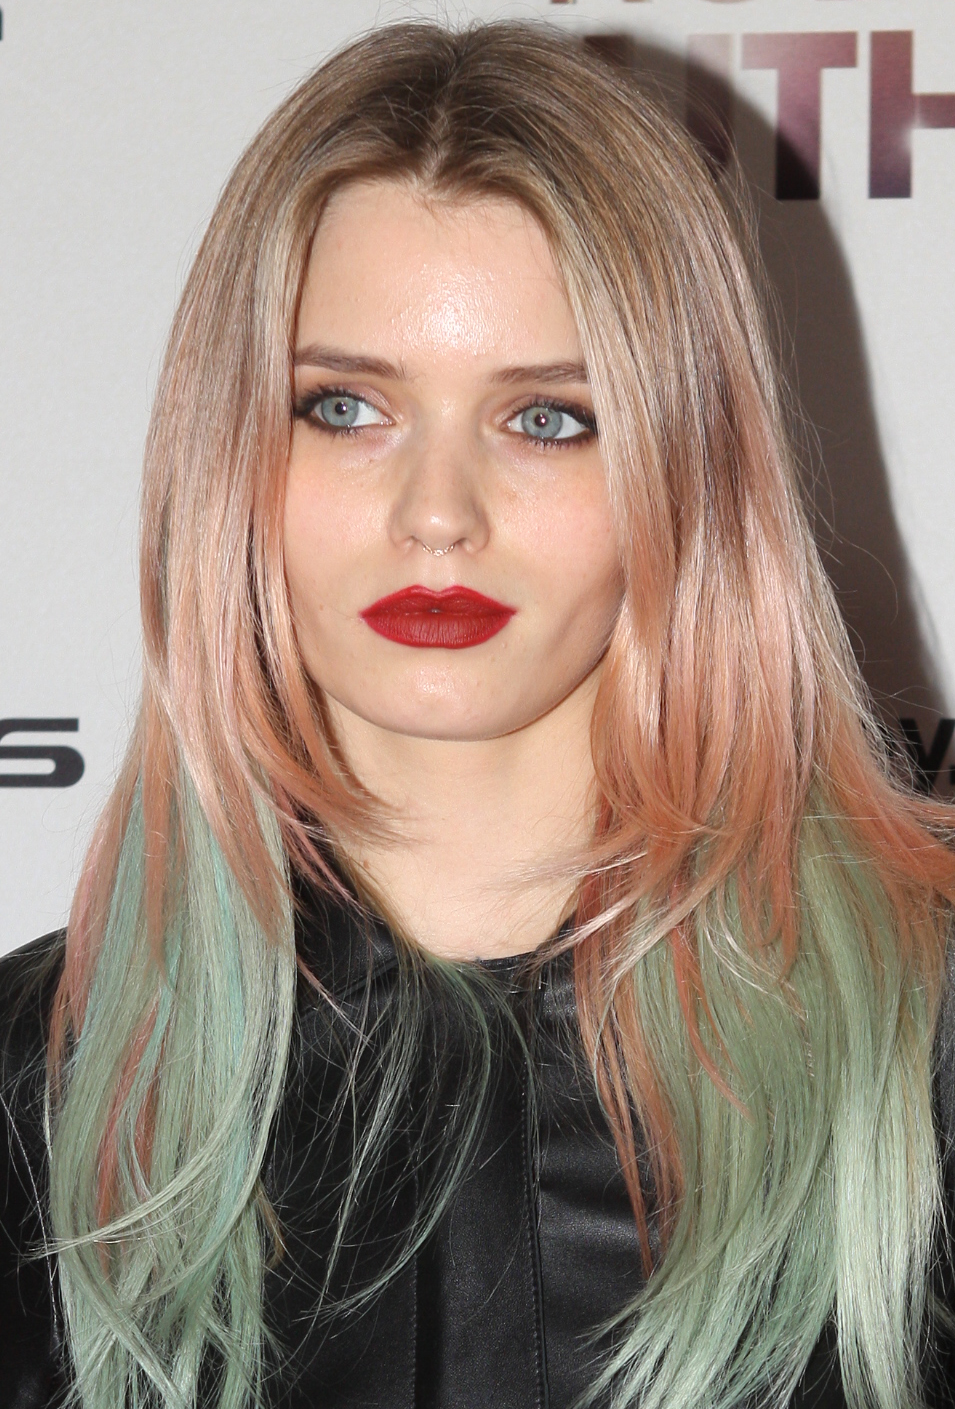 Amazing Abbey Lee Kershaw Pictures & Backgrounds